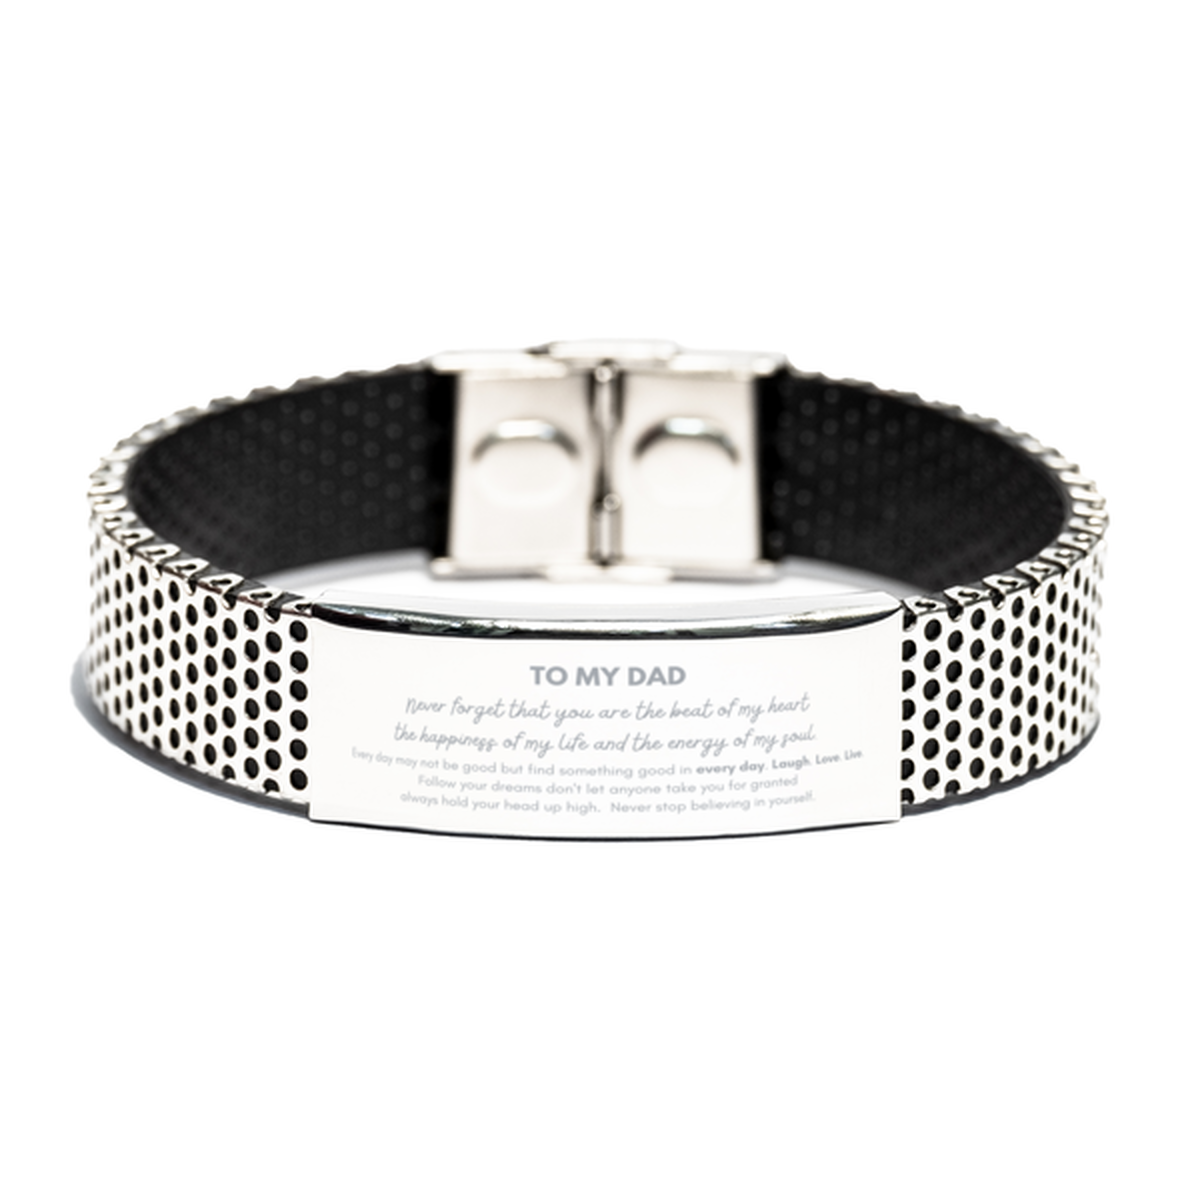 To My Dad Bracelet Gifts, Christmas Dad Stainless Steel Bracelet Present, Birthday Unique Motivational For Dad, To My Dad Never forget that you are the beat of my heart the happiness of my life and the energy of my soul